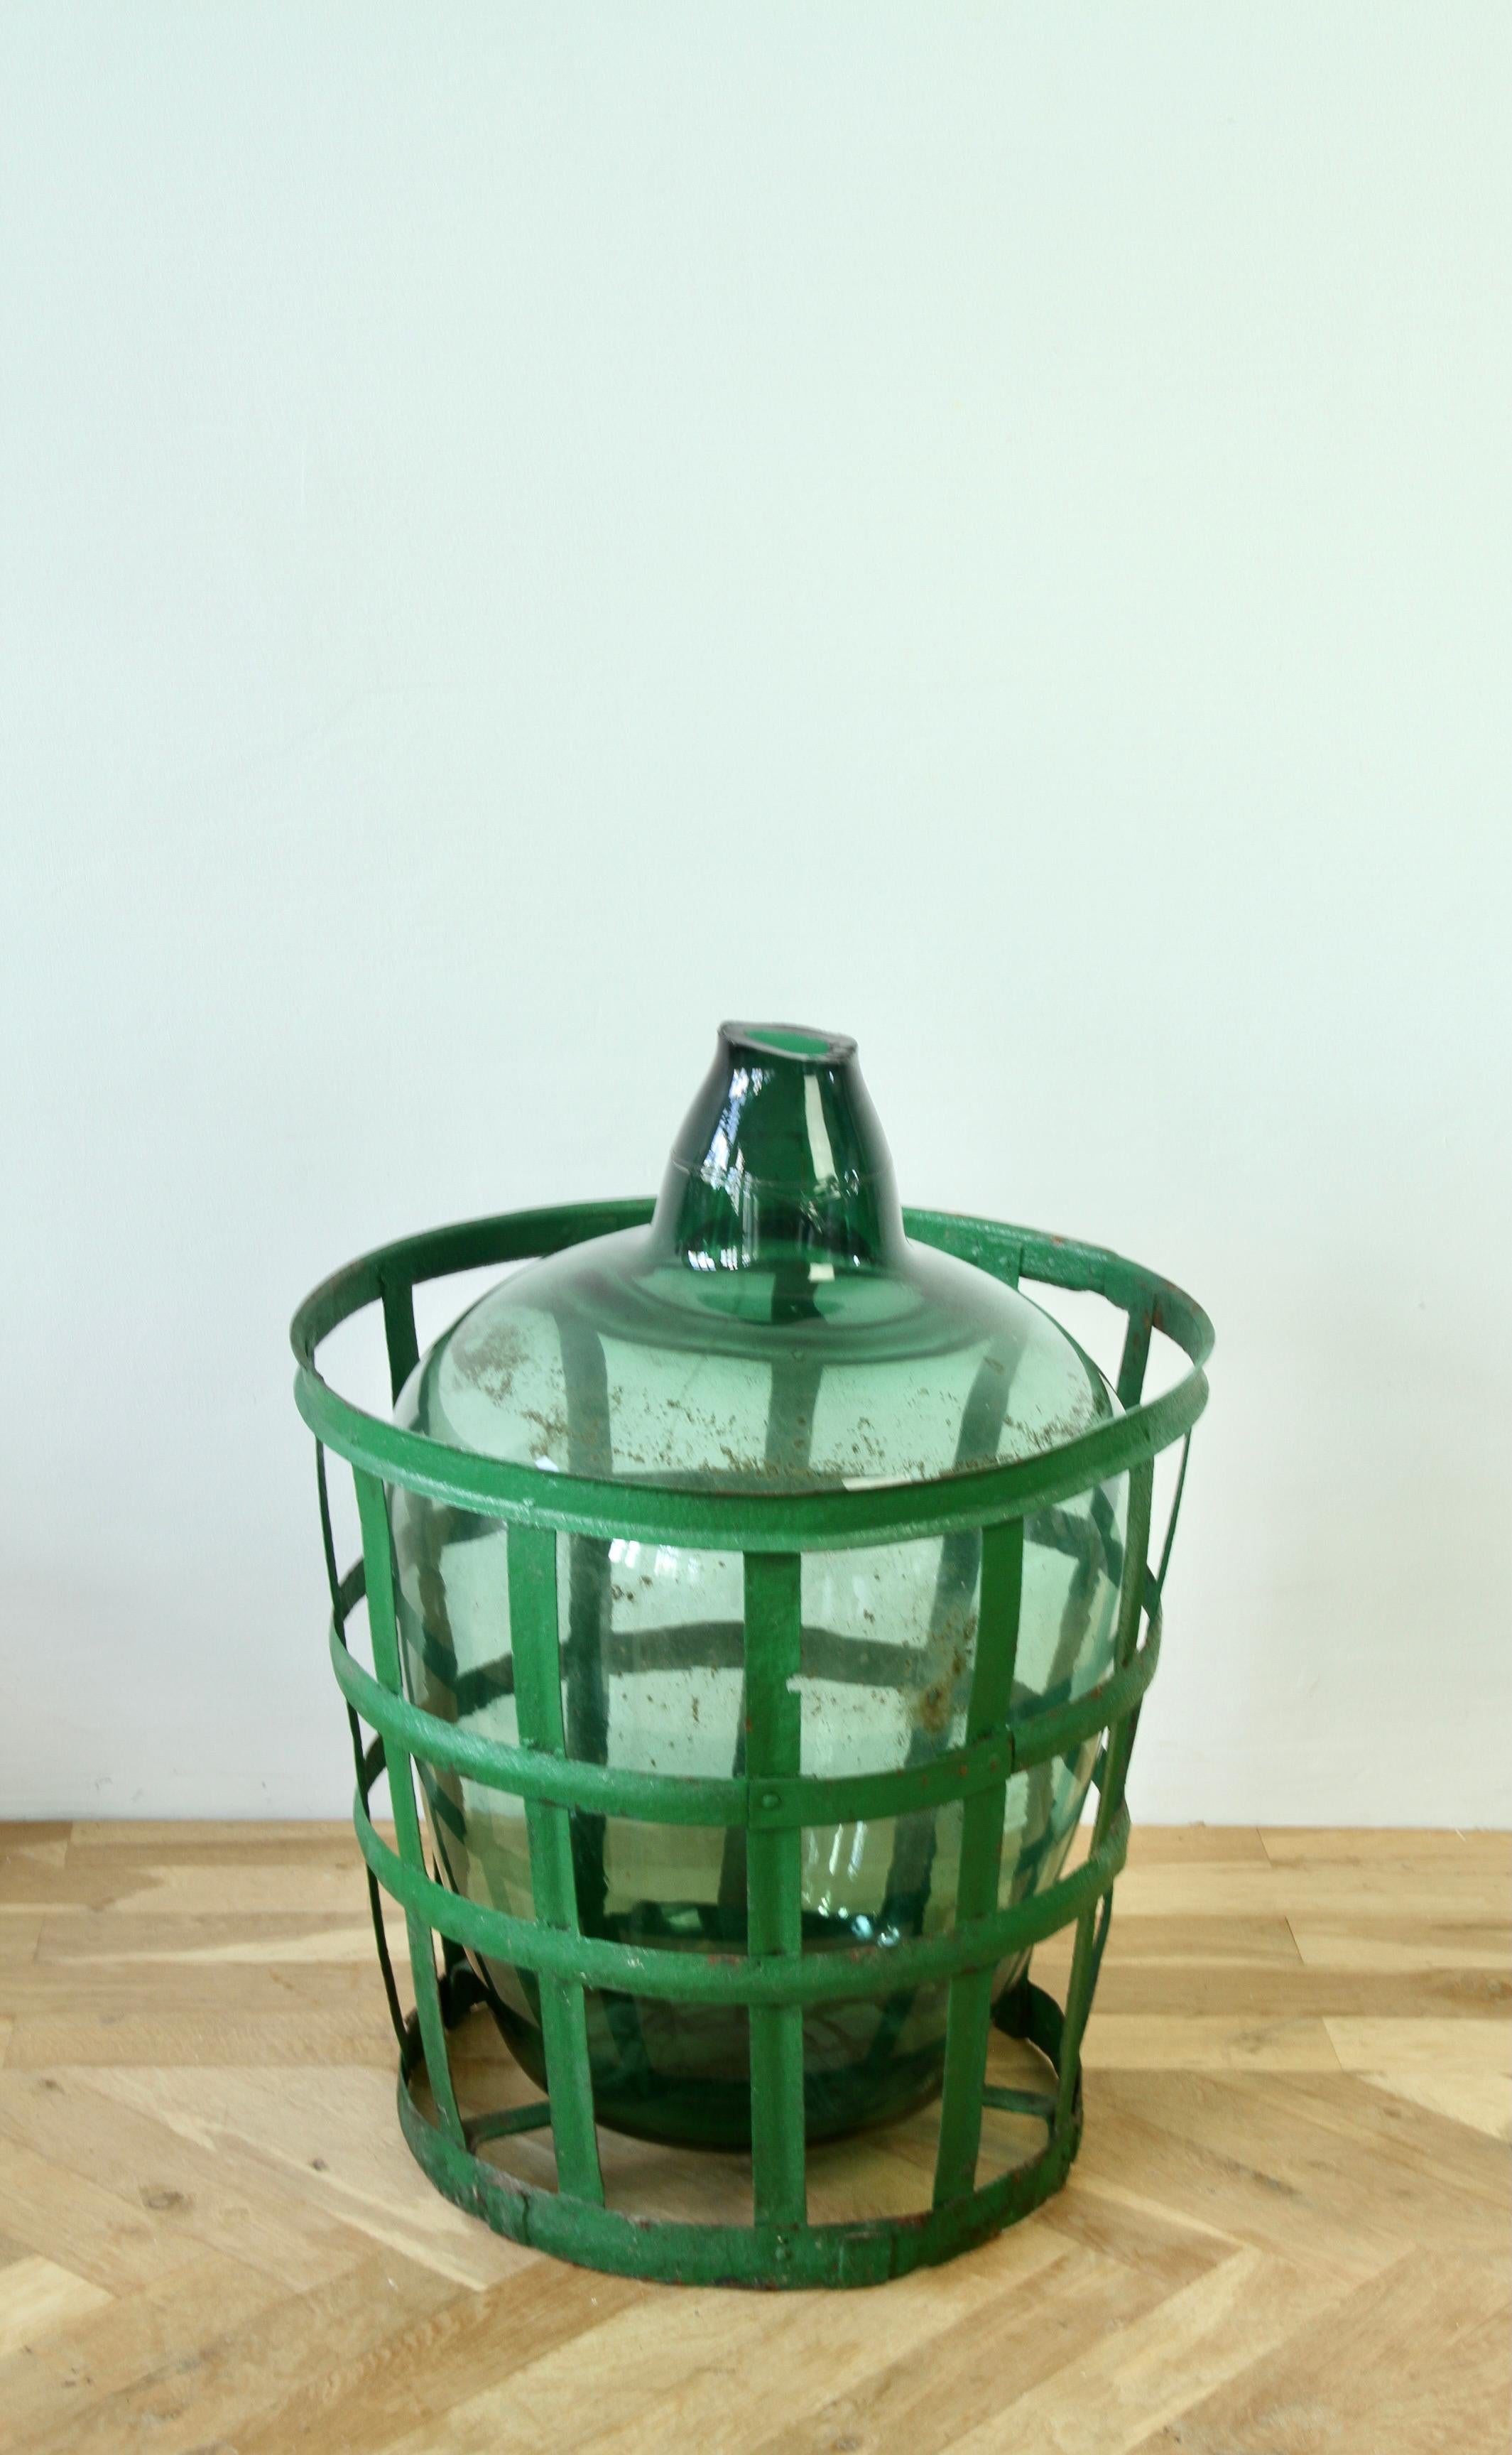 Large Green Glass Hungarian Demijohn, Amphora or Vase with Original Iron Basket In Distressed Condition For Sale In Landau an der Isar, Bayern